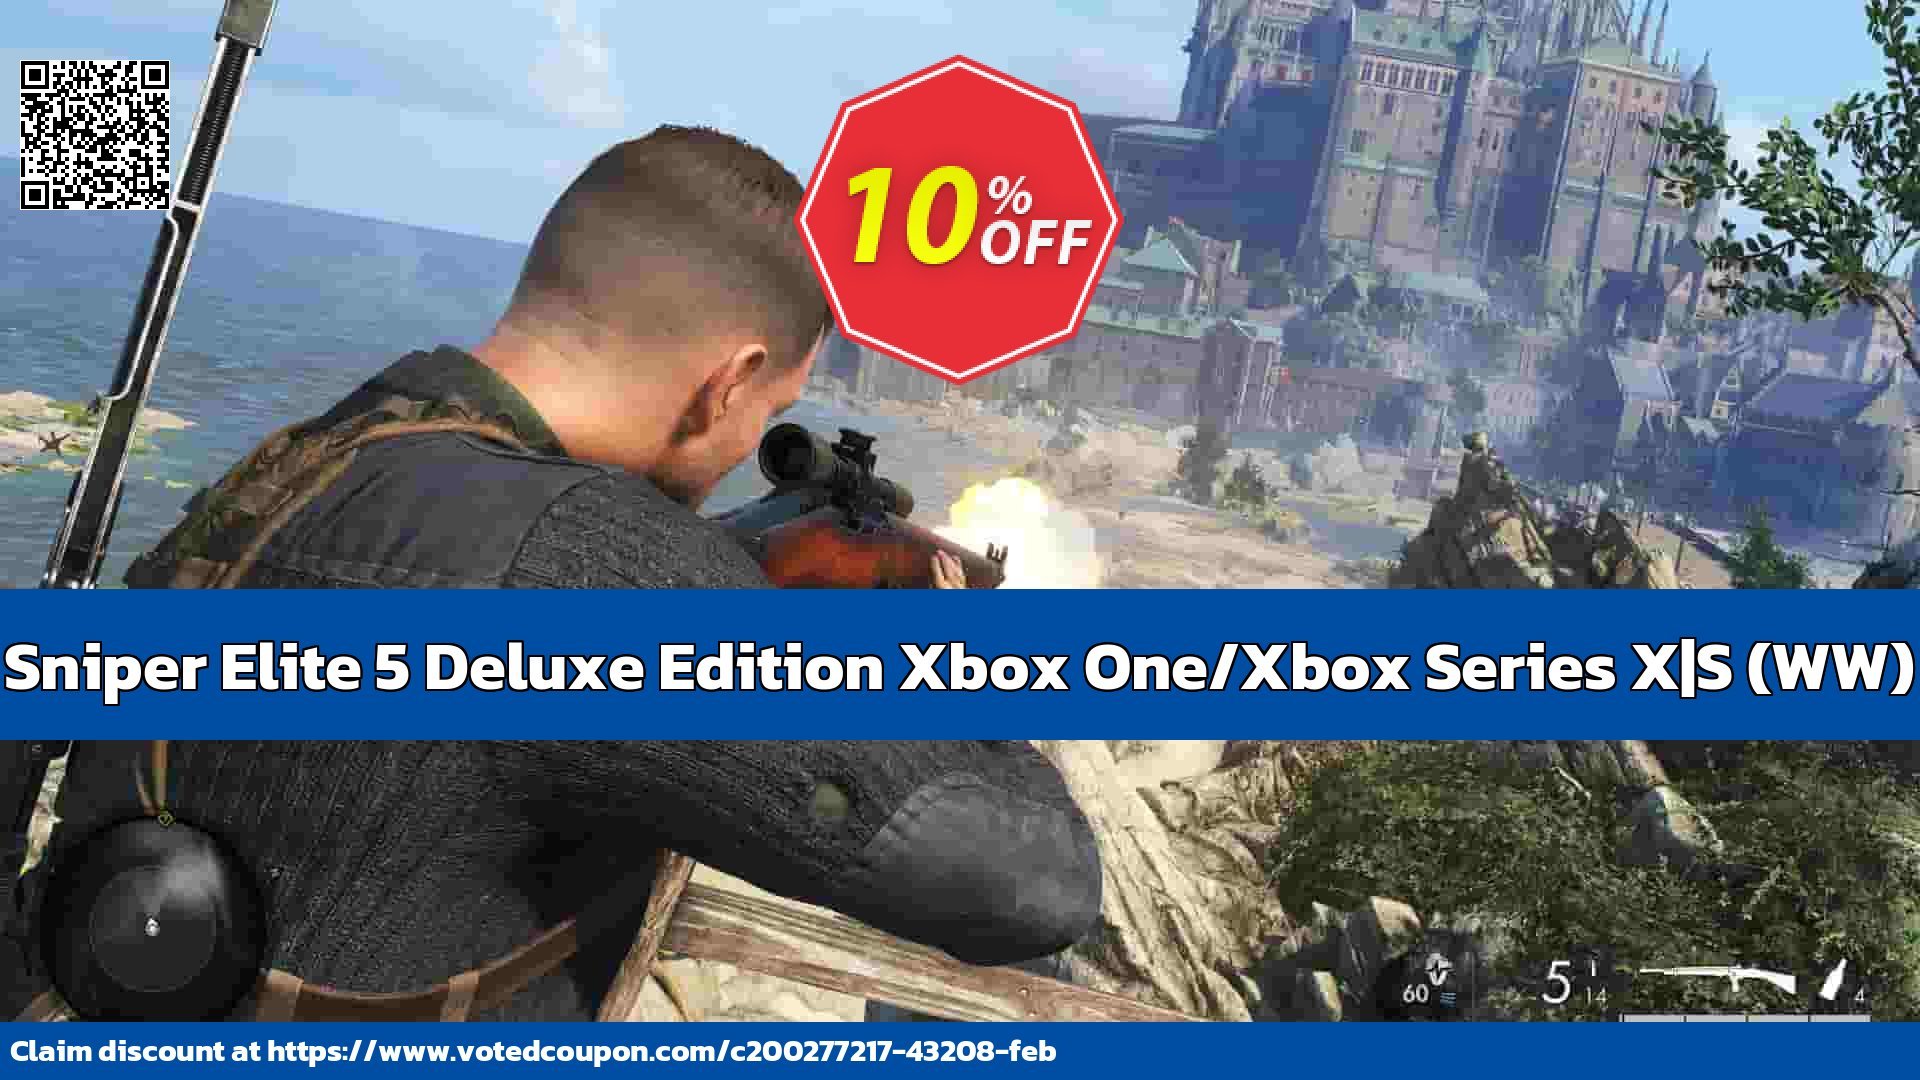 Sniper Elite 5 Deluxe Edition Xbox One/Xbox Series X|S, WW  Coupon Code May 2024, 10% OFF - VotedCoupon